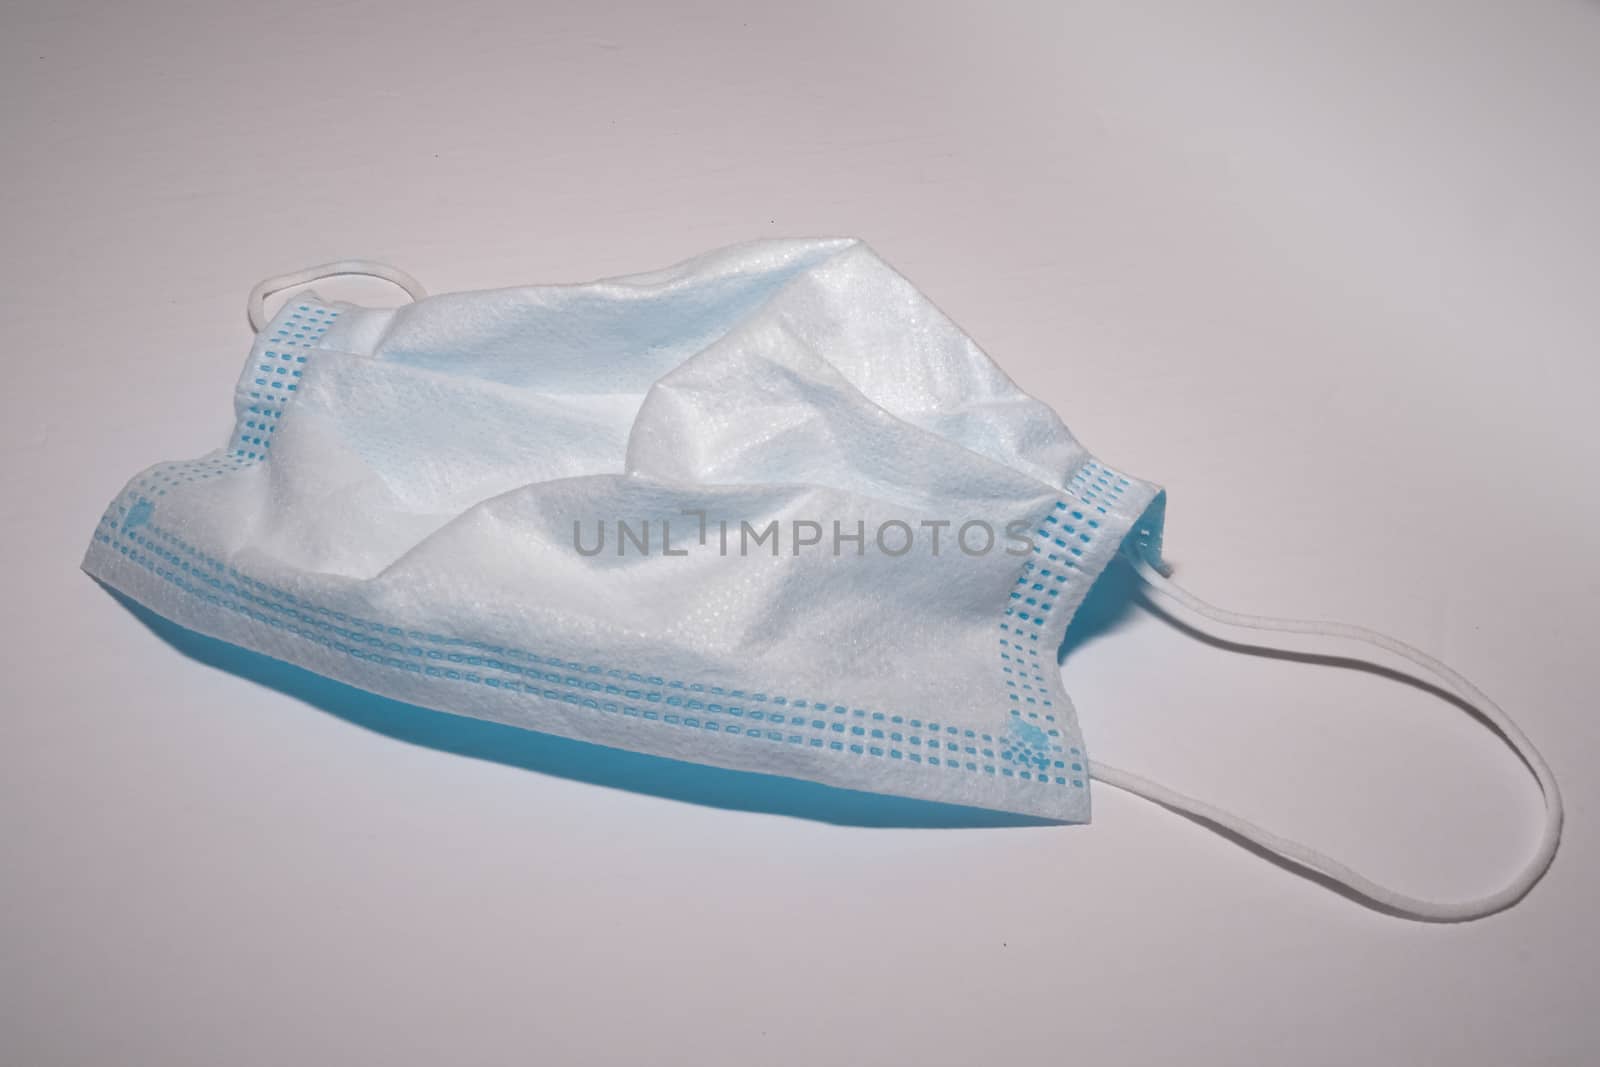 A single, white, hospital-grade medical face mask is laid out on a white surface.